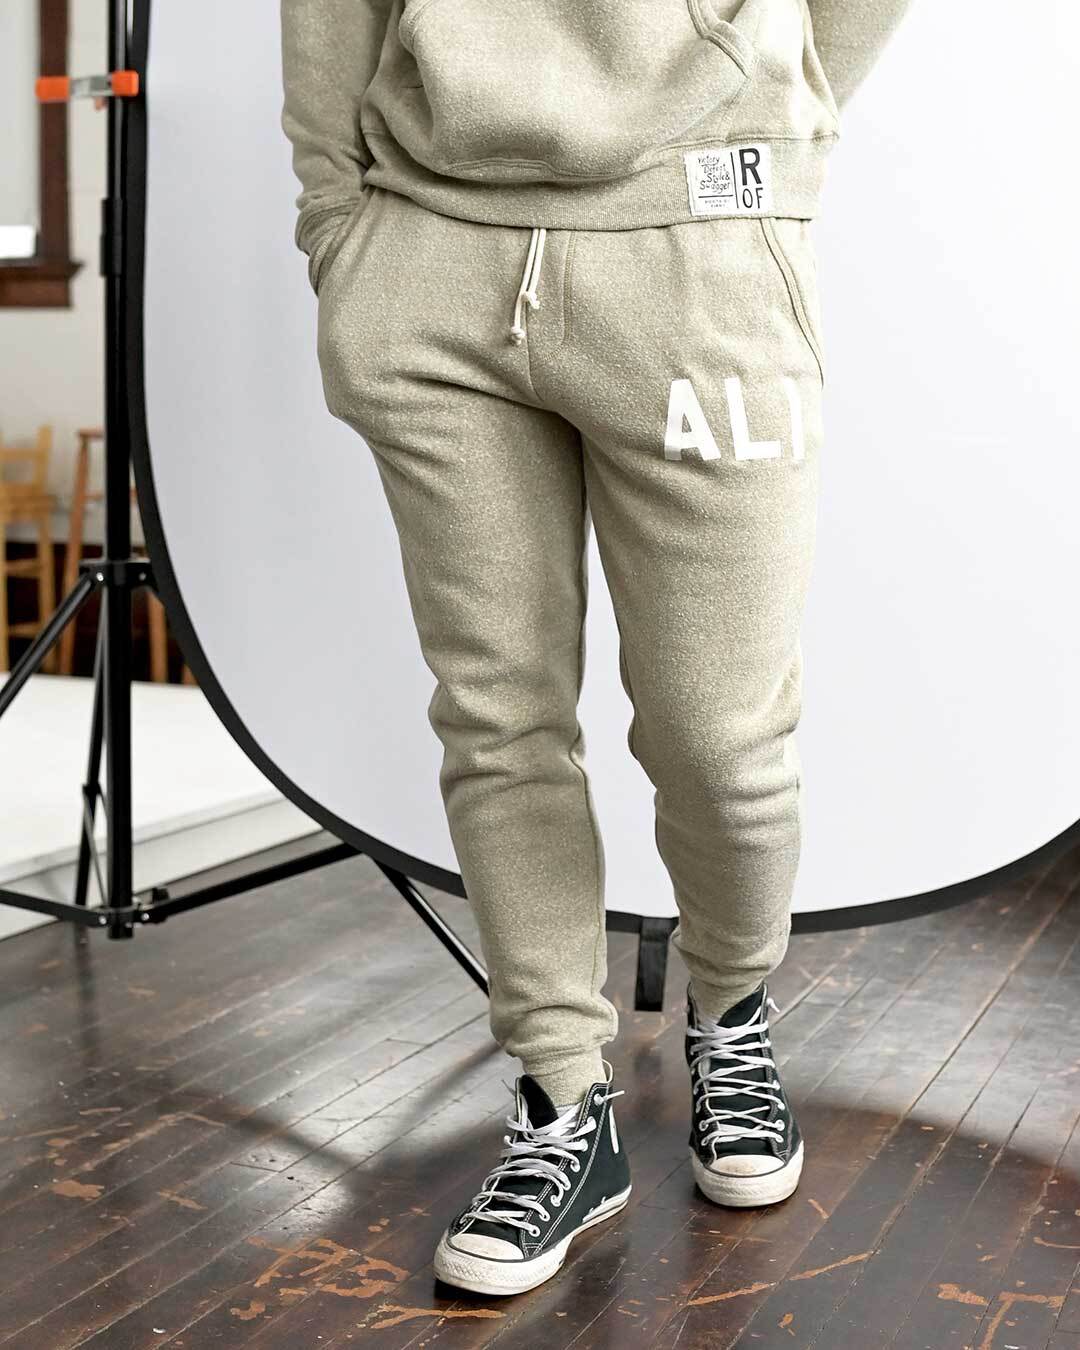 Ali Classic Heather Sage Sweatpants - Roots of Fight